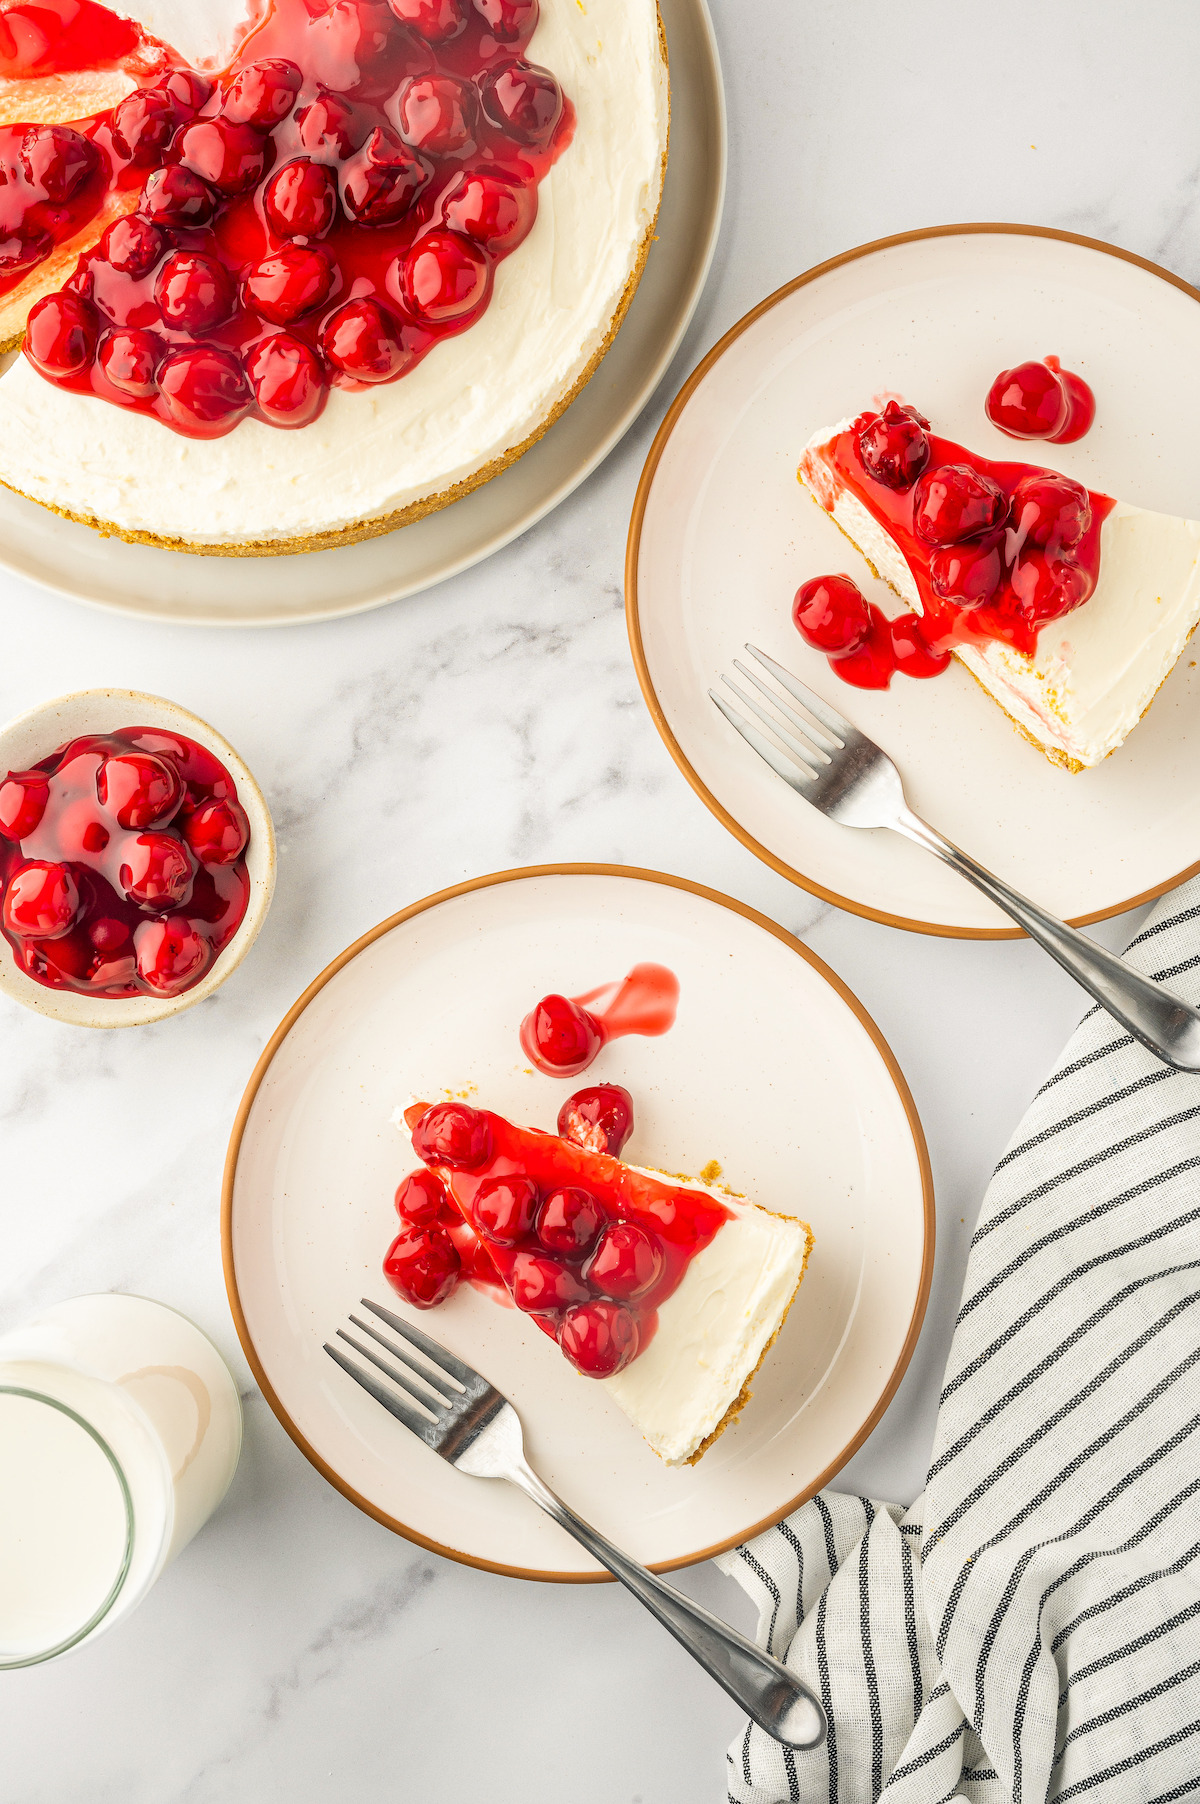 Overhead shot of two slices of cheesecake on dessert plates next to the whole cheesecake.